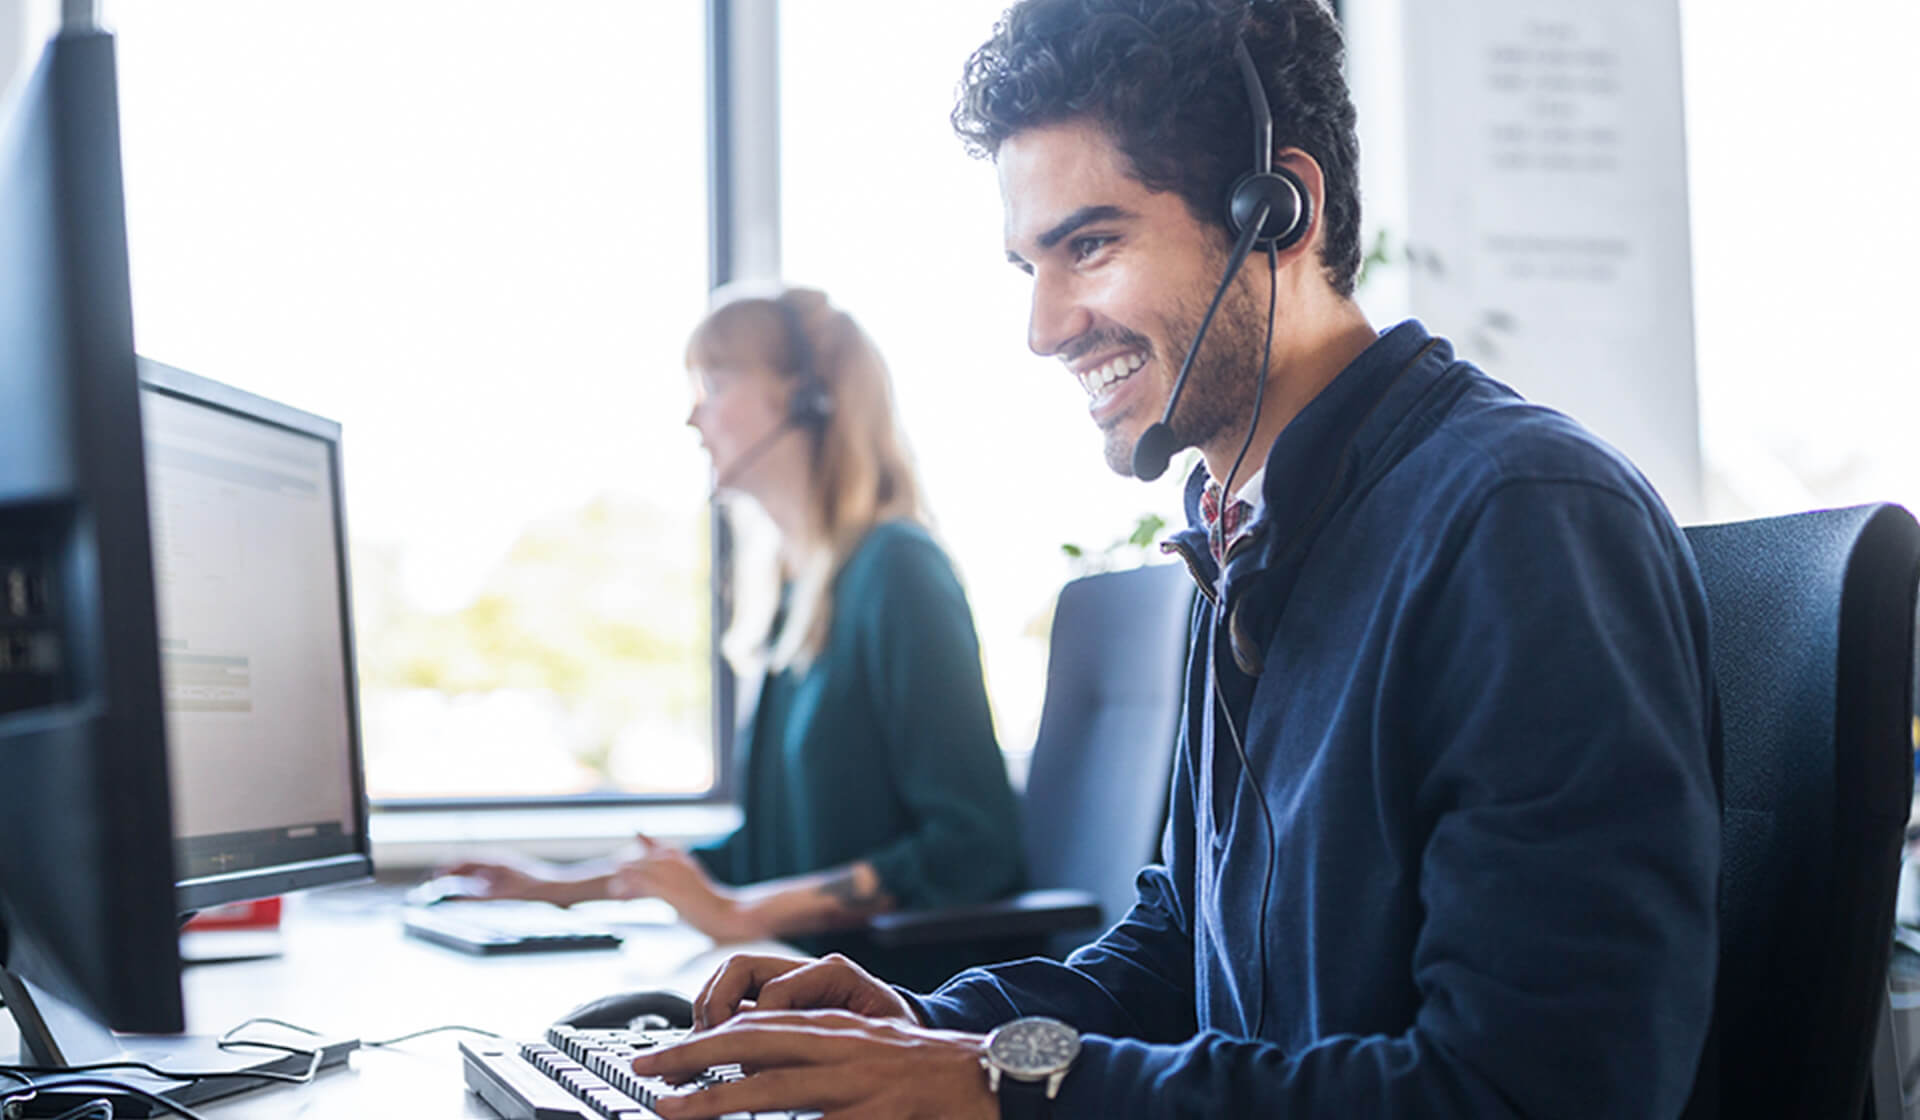 Smiling customer service representative with headset using computer at desk